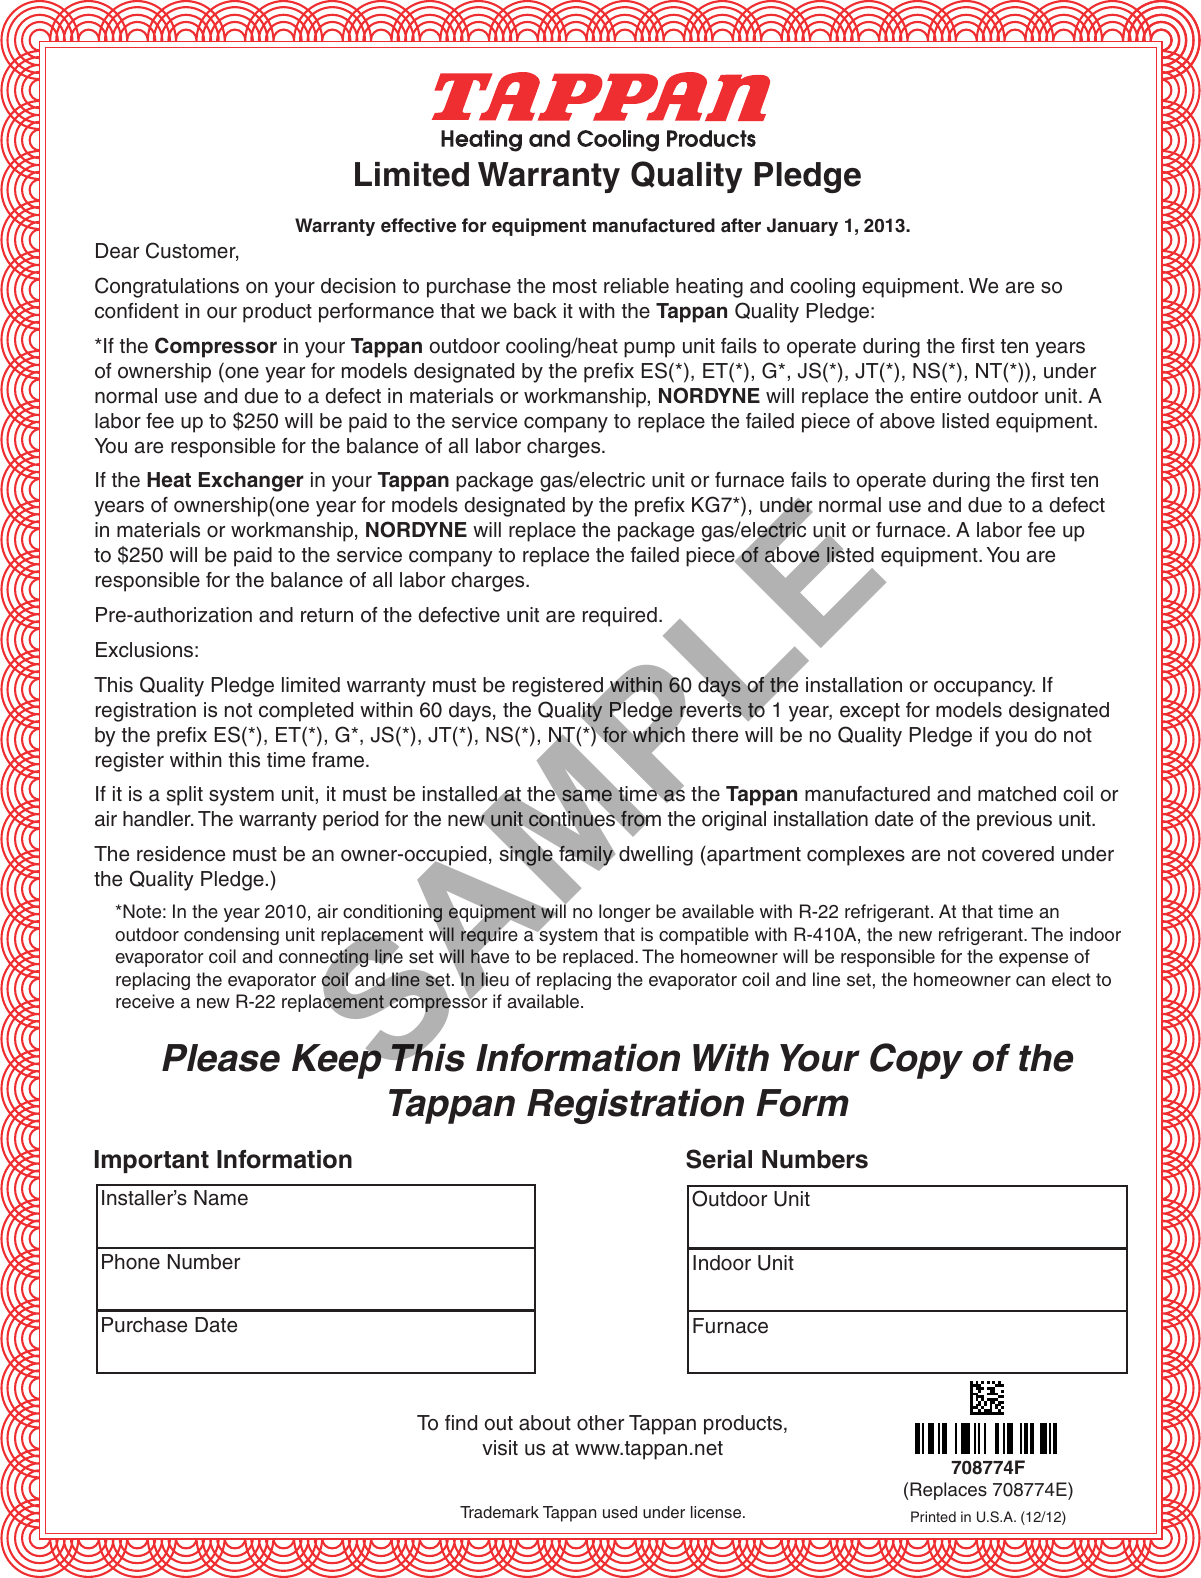 Page 1 of 8 - Tappan Limited Warranty